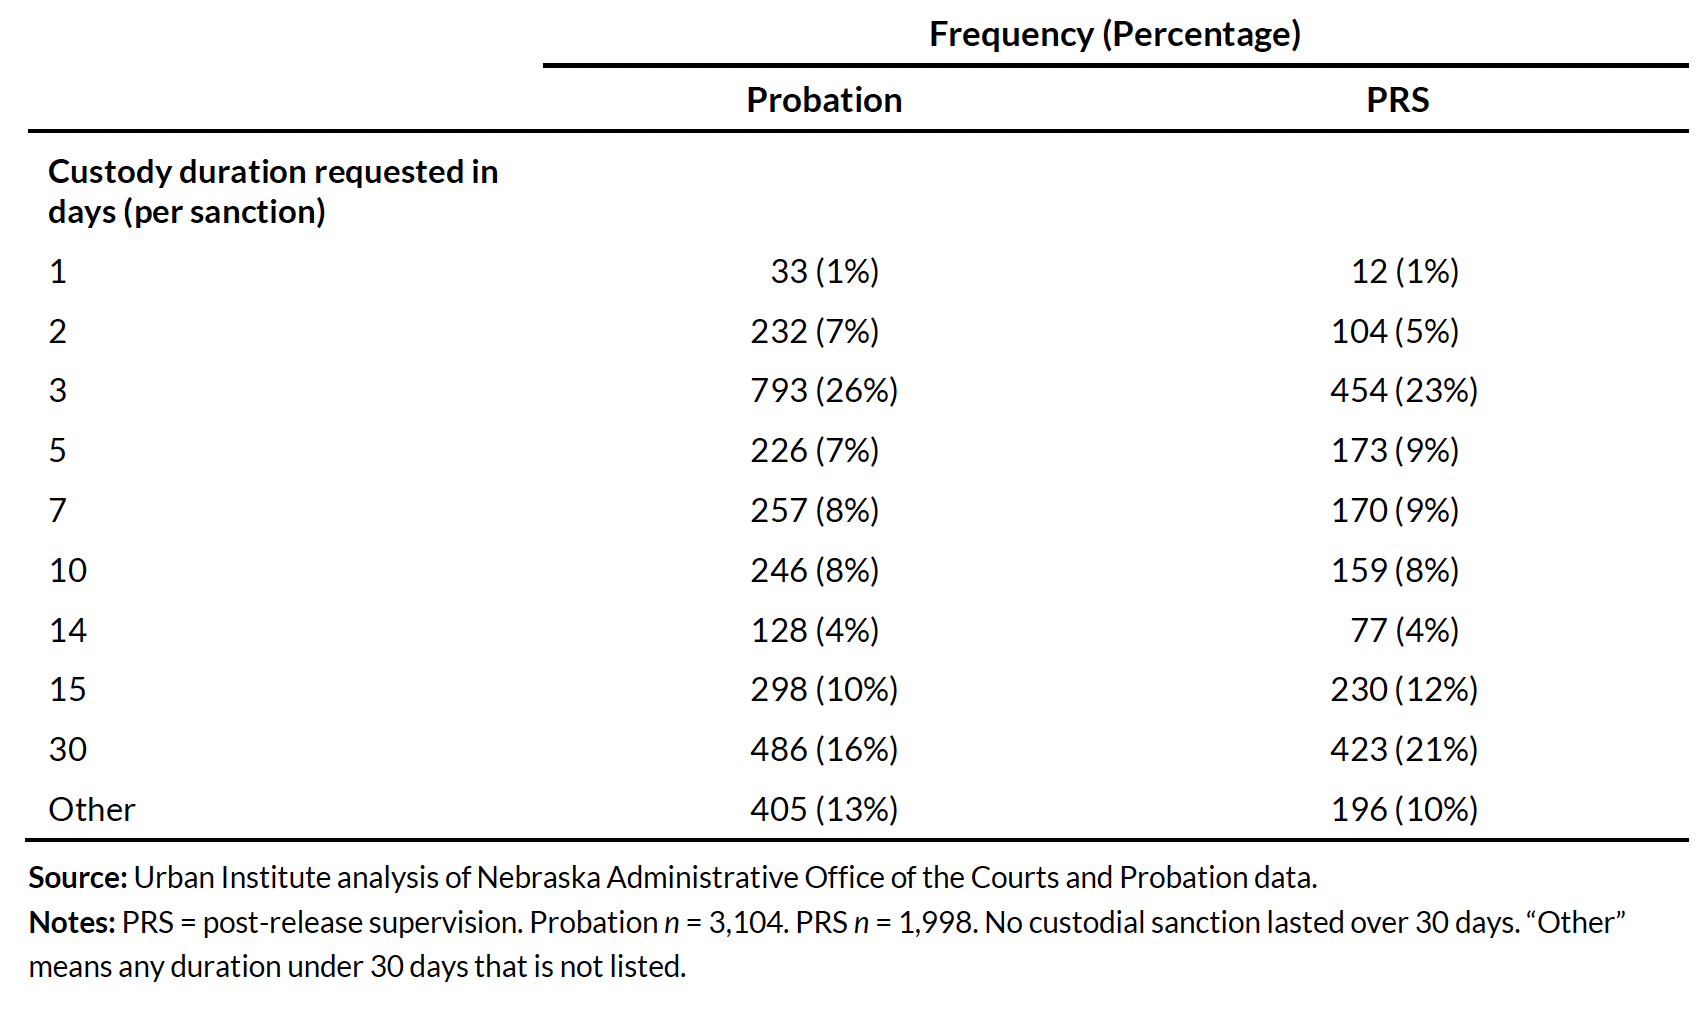 Illustrating Frequency of Custody Durations for Custodial Sanctions among Nebraska’s Probation and PRS Populations, August 2015 through FY 2019